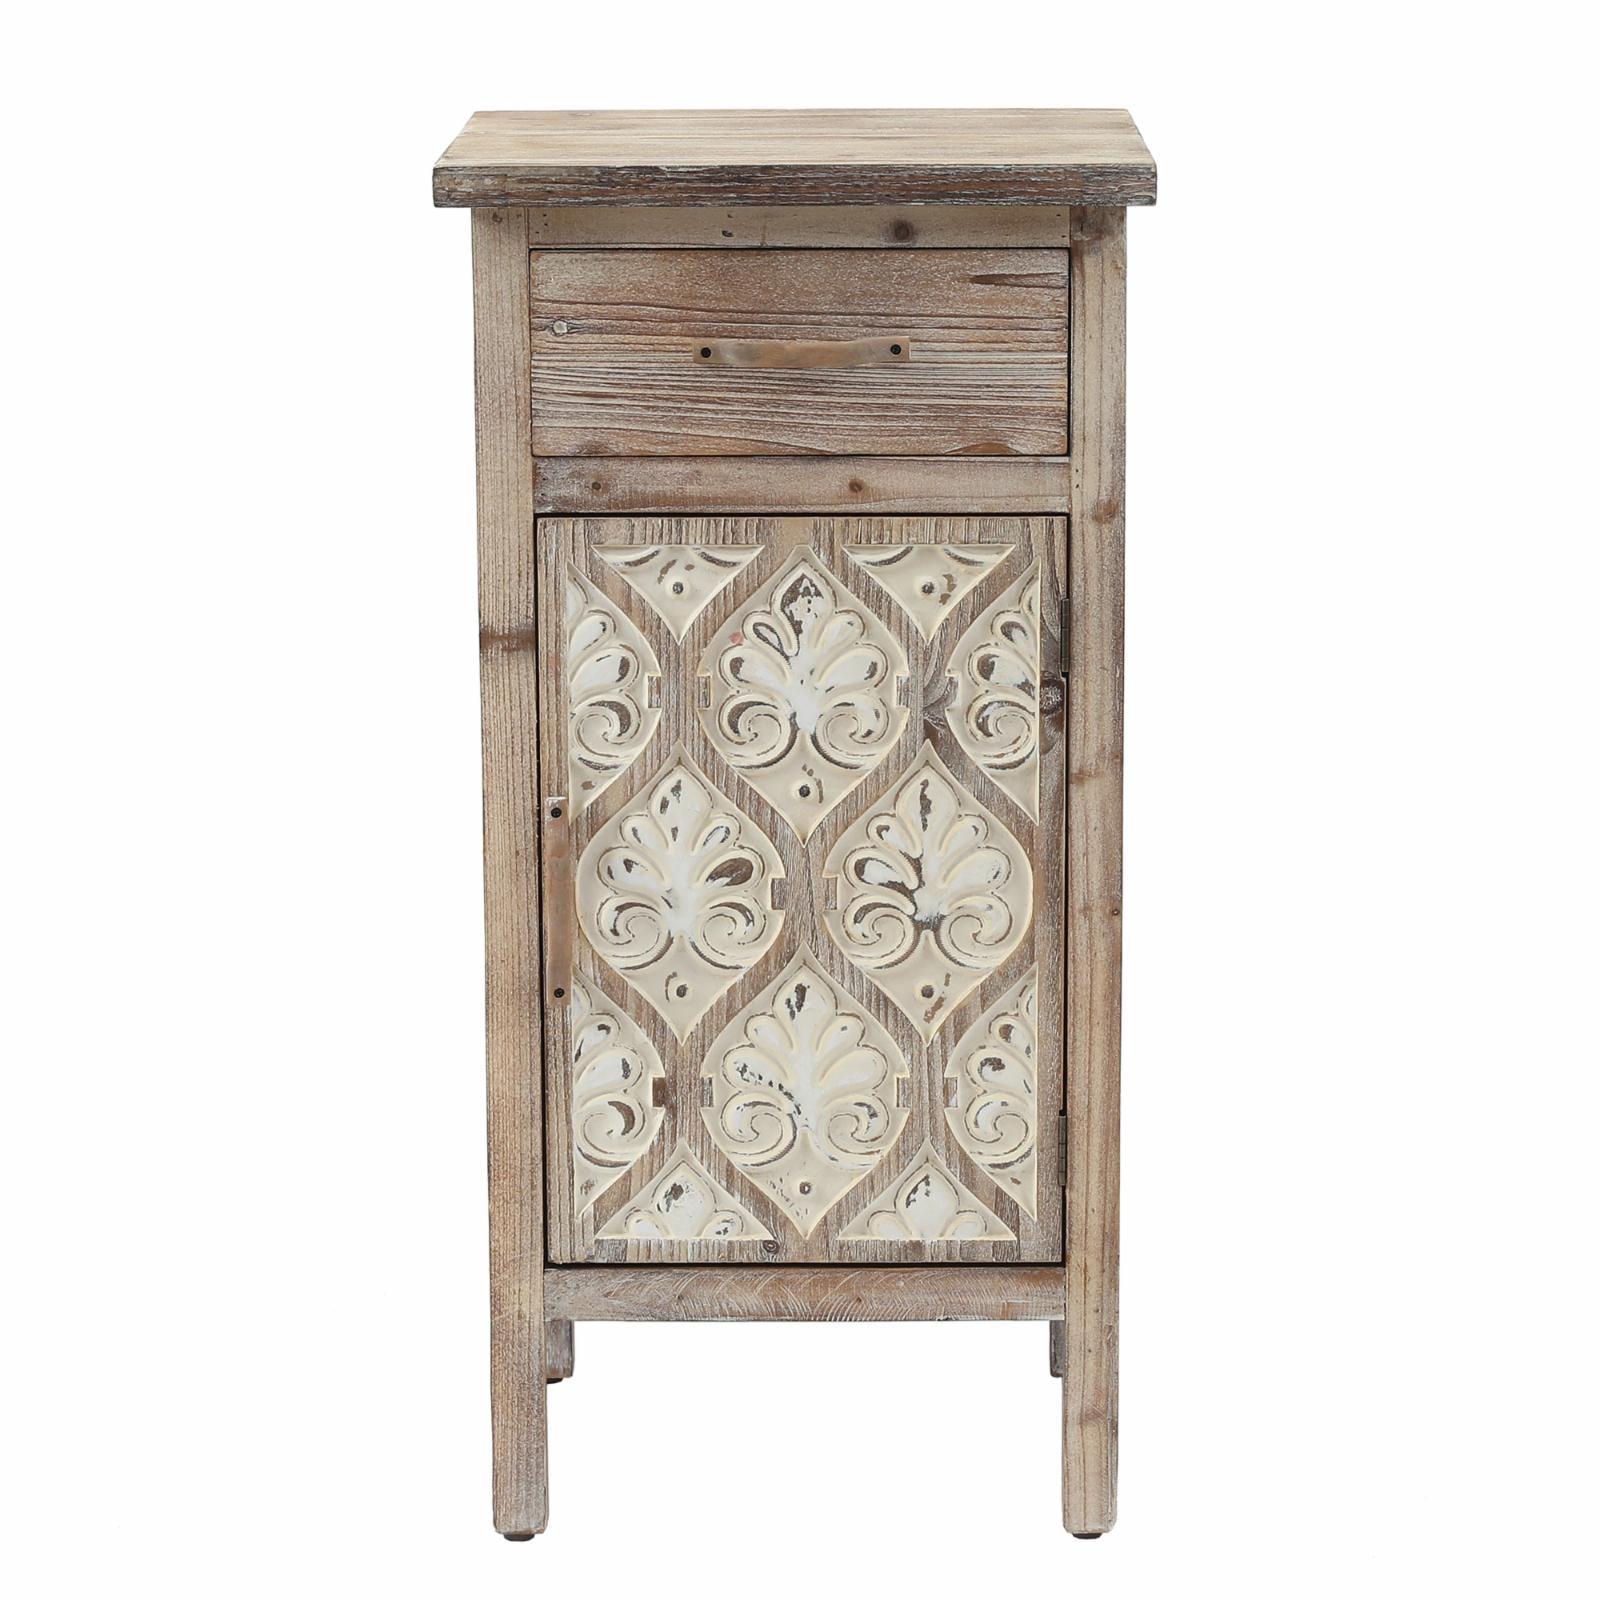 Farmhouse Chic Damask Carved Wood Side Table with Storage